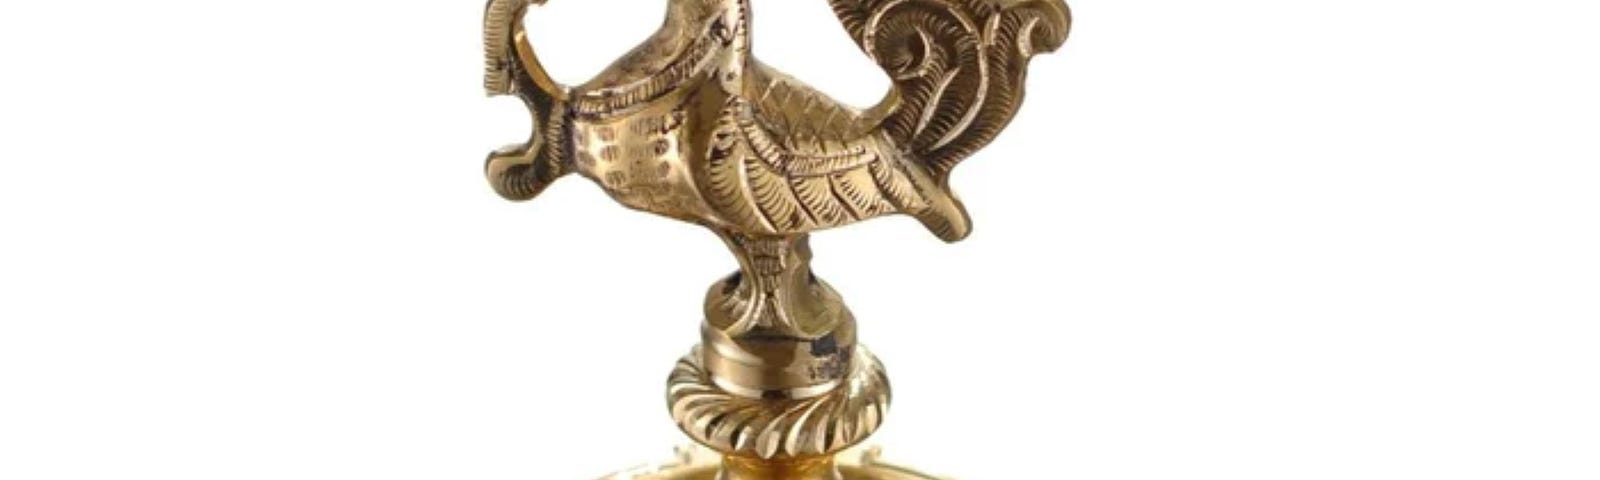 A shining brass oil lamp stand with a peacock head, Indian craft design